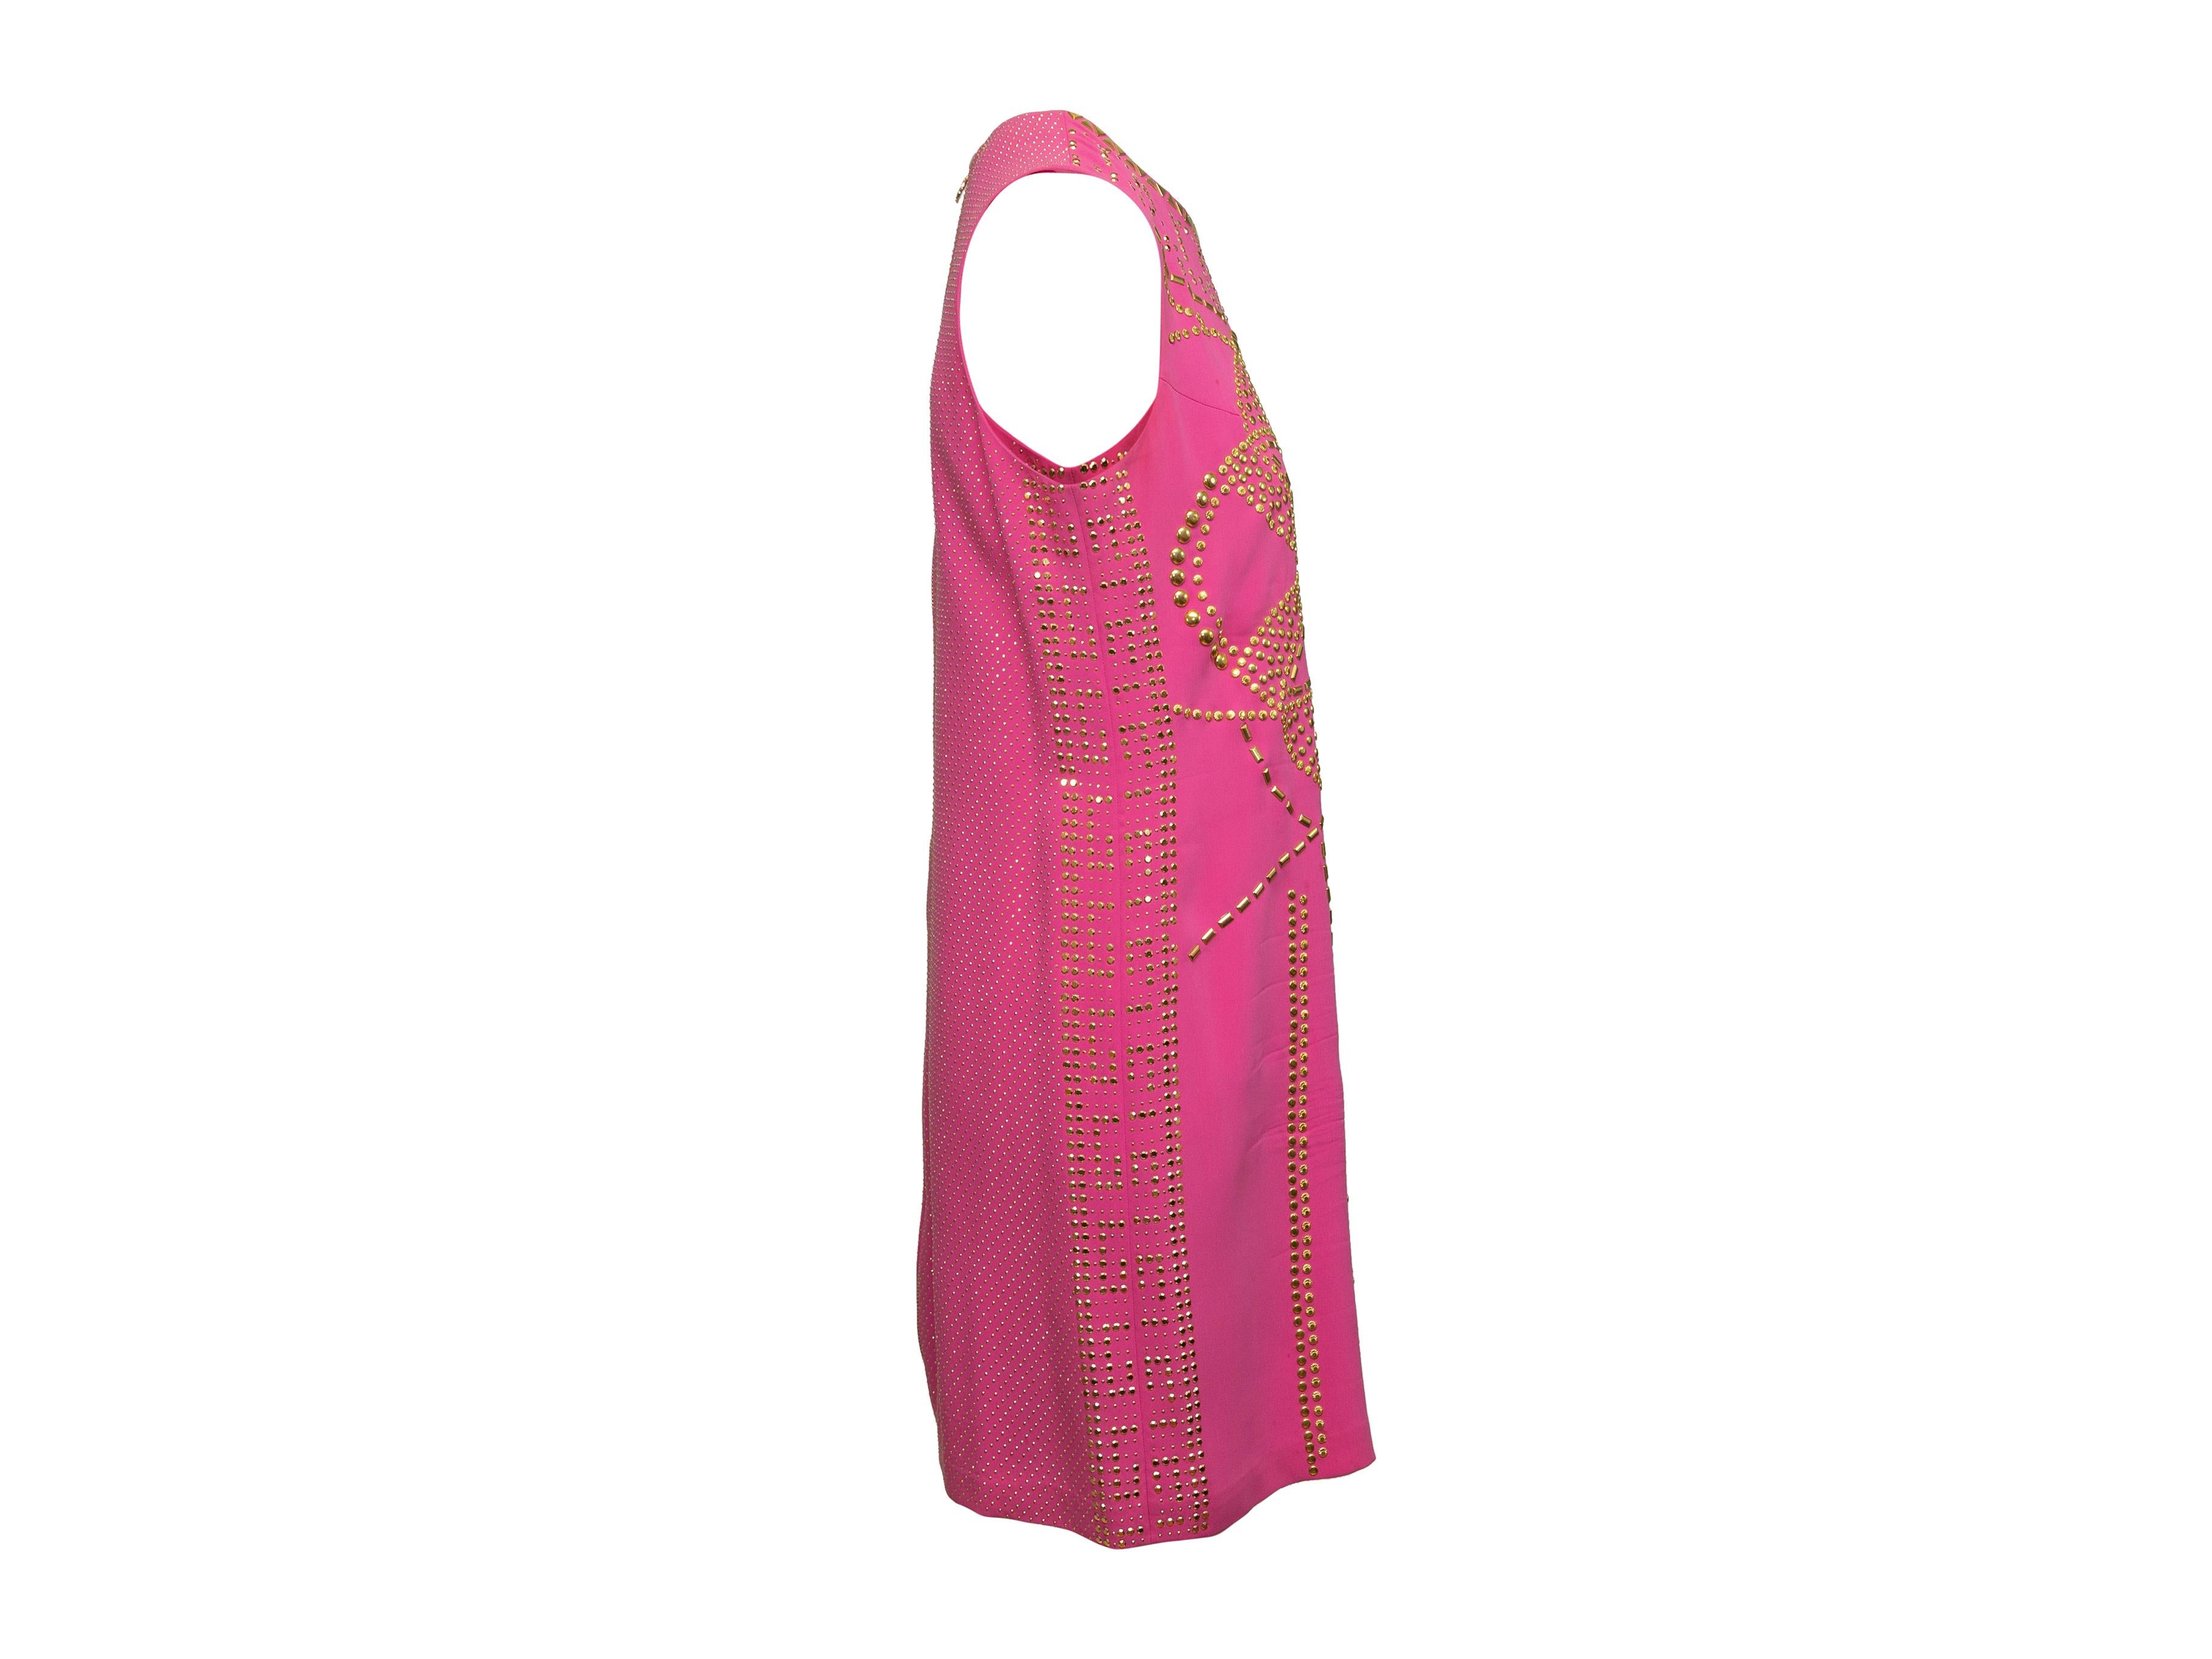 Product details: Hot pink sleeveless dress by Versace for H&M. Gold-tone stud embellishments throughout. Crew neck. Exposed zip closure at center back. 34